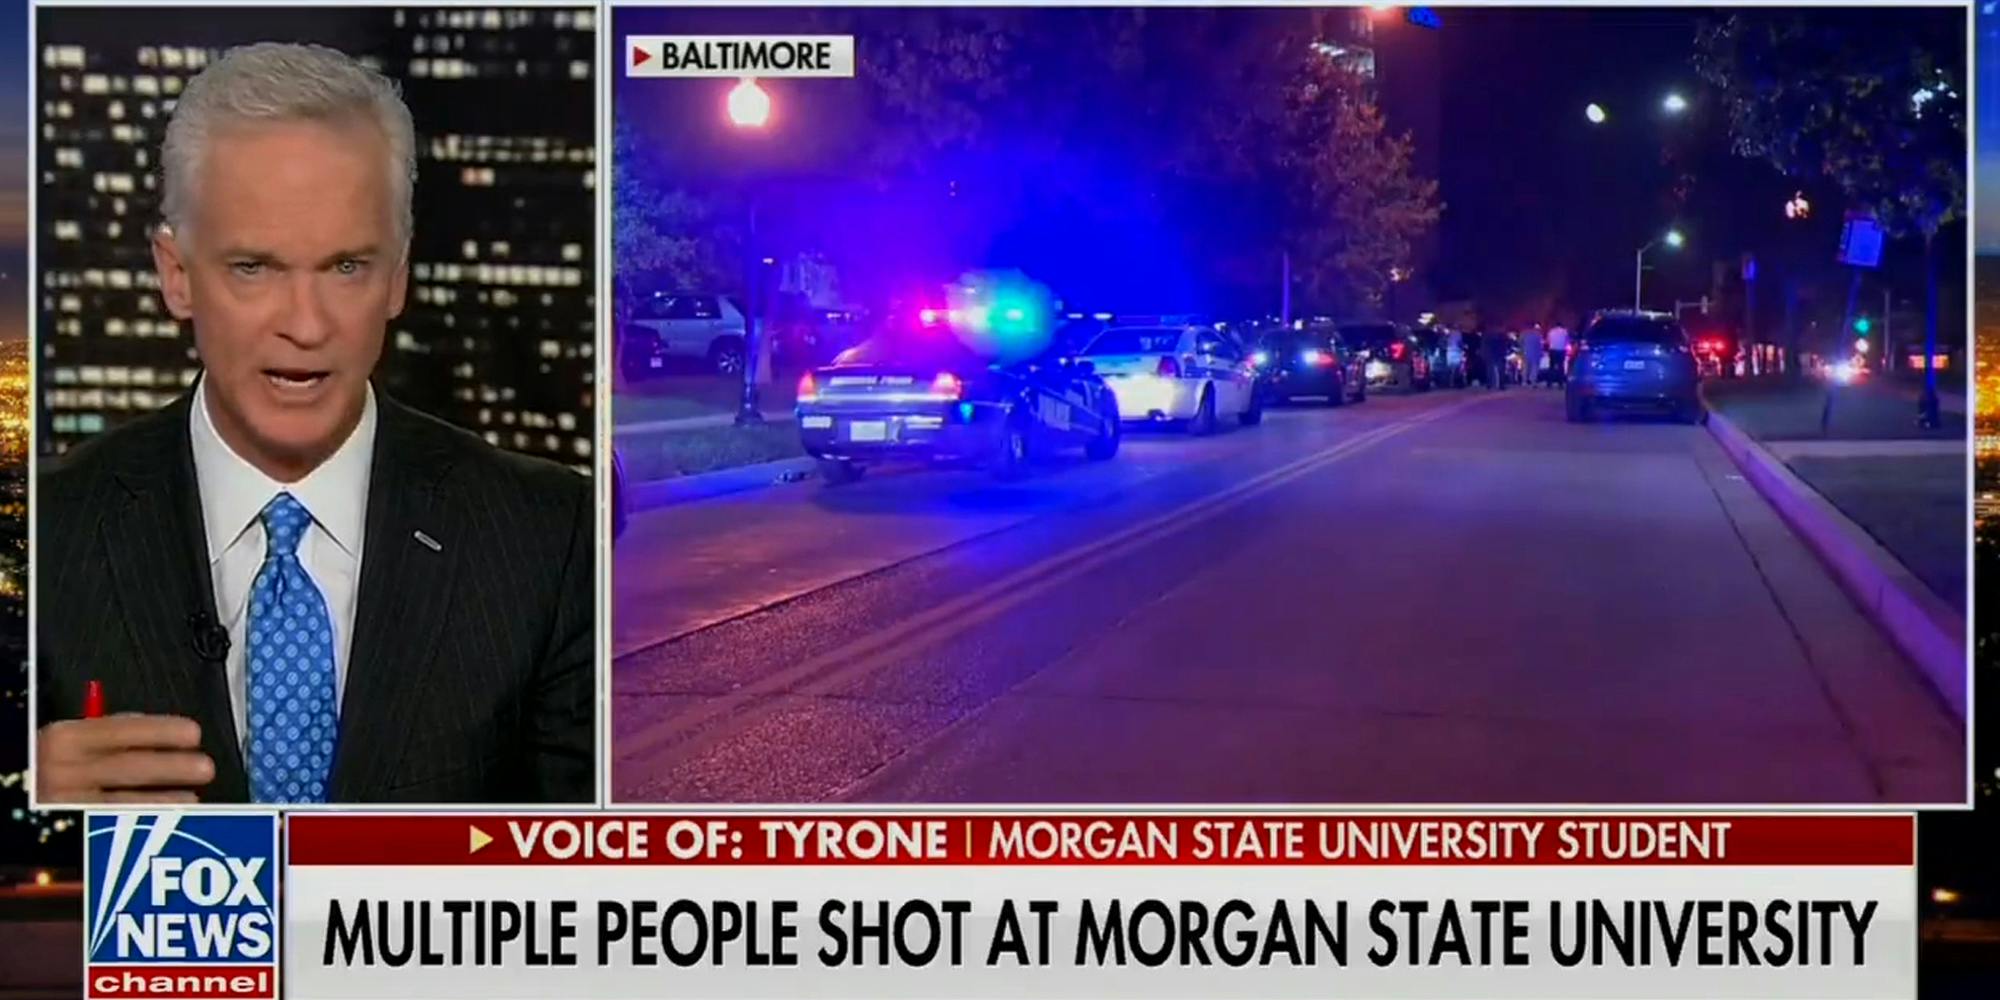 Fox News reporter speaking with caption "voice of: Tyrone Morgan State University Student Multiple People Shot At Morgan State University"